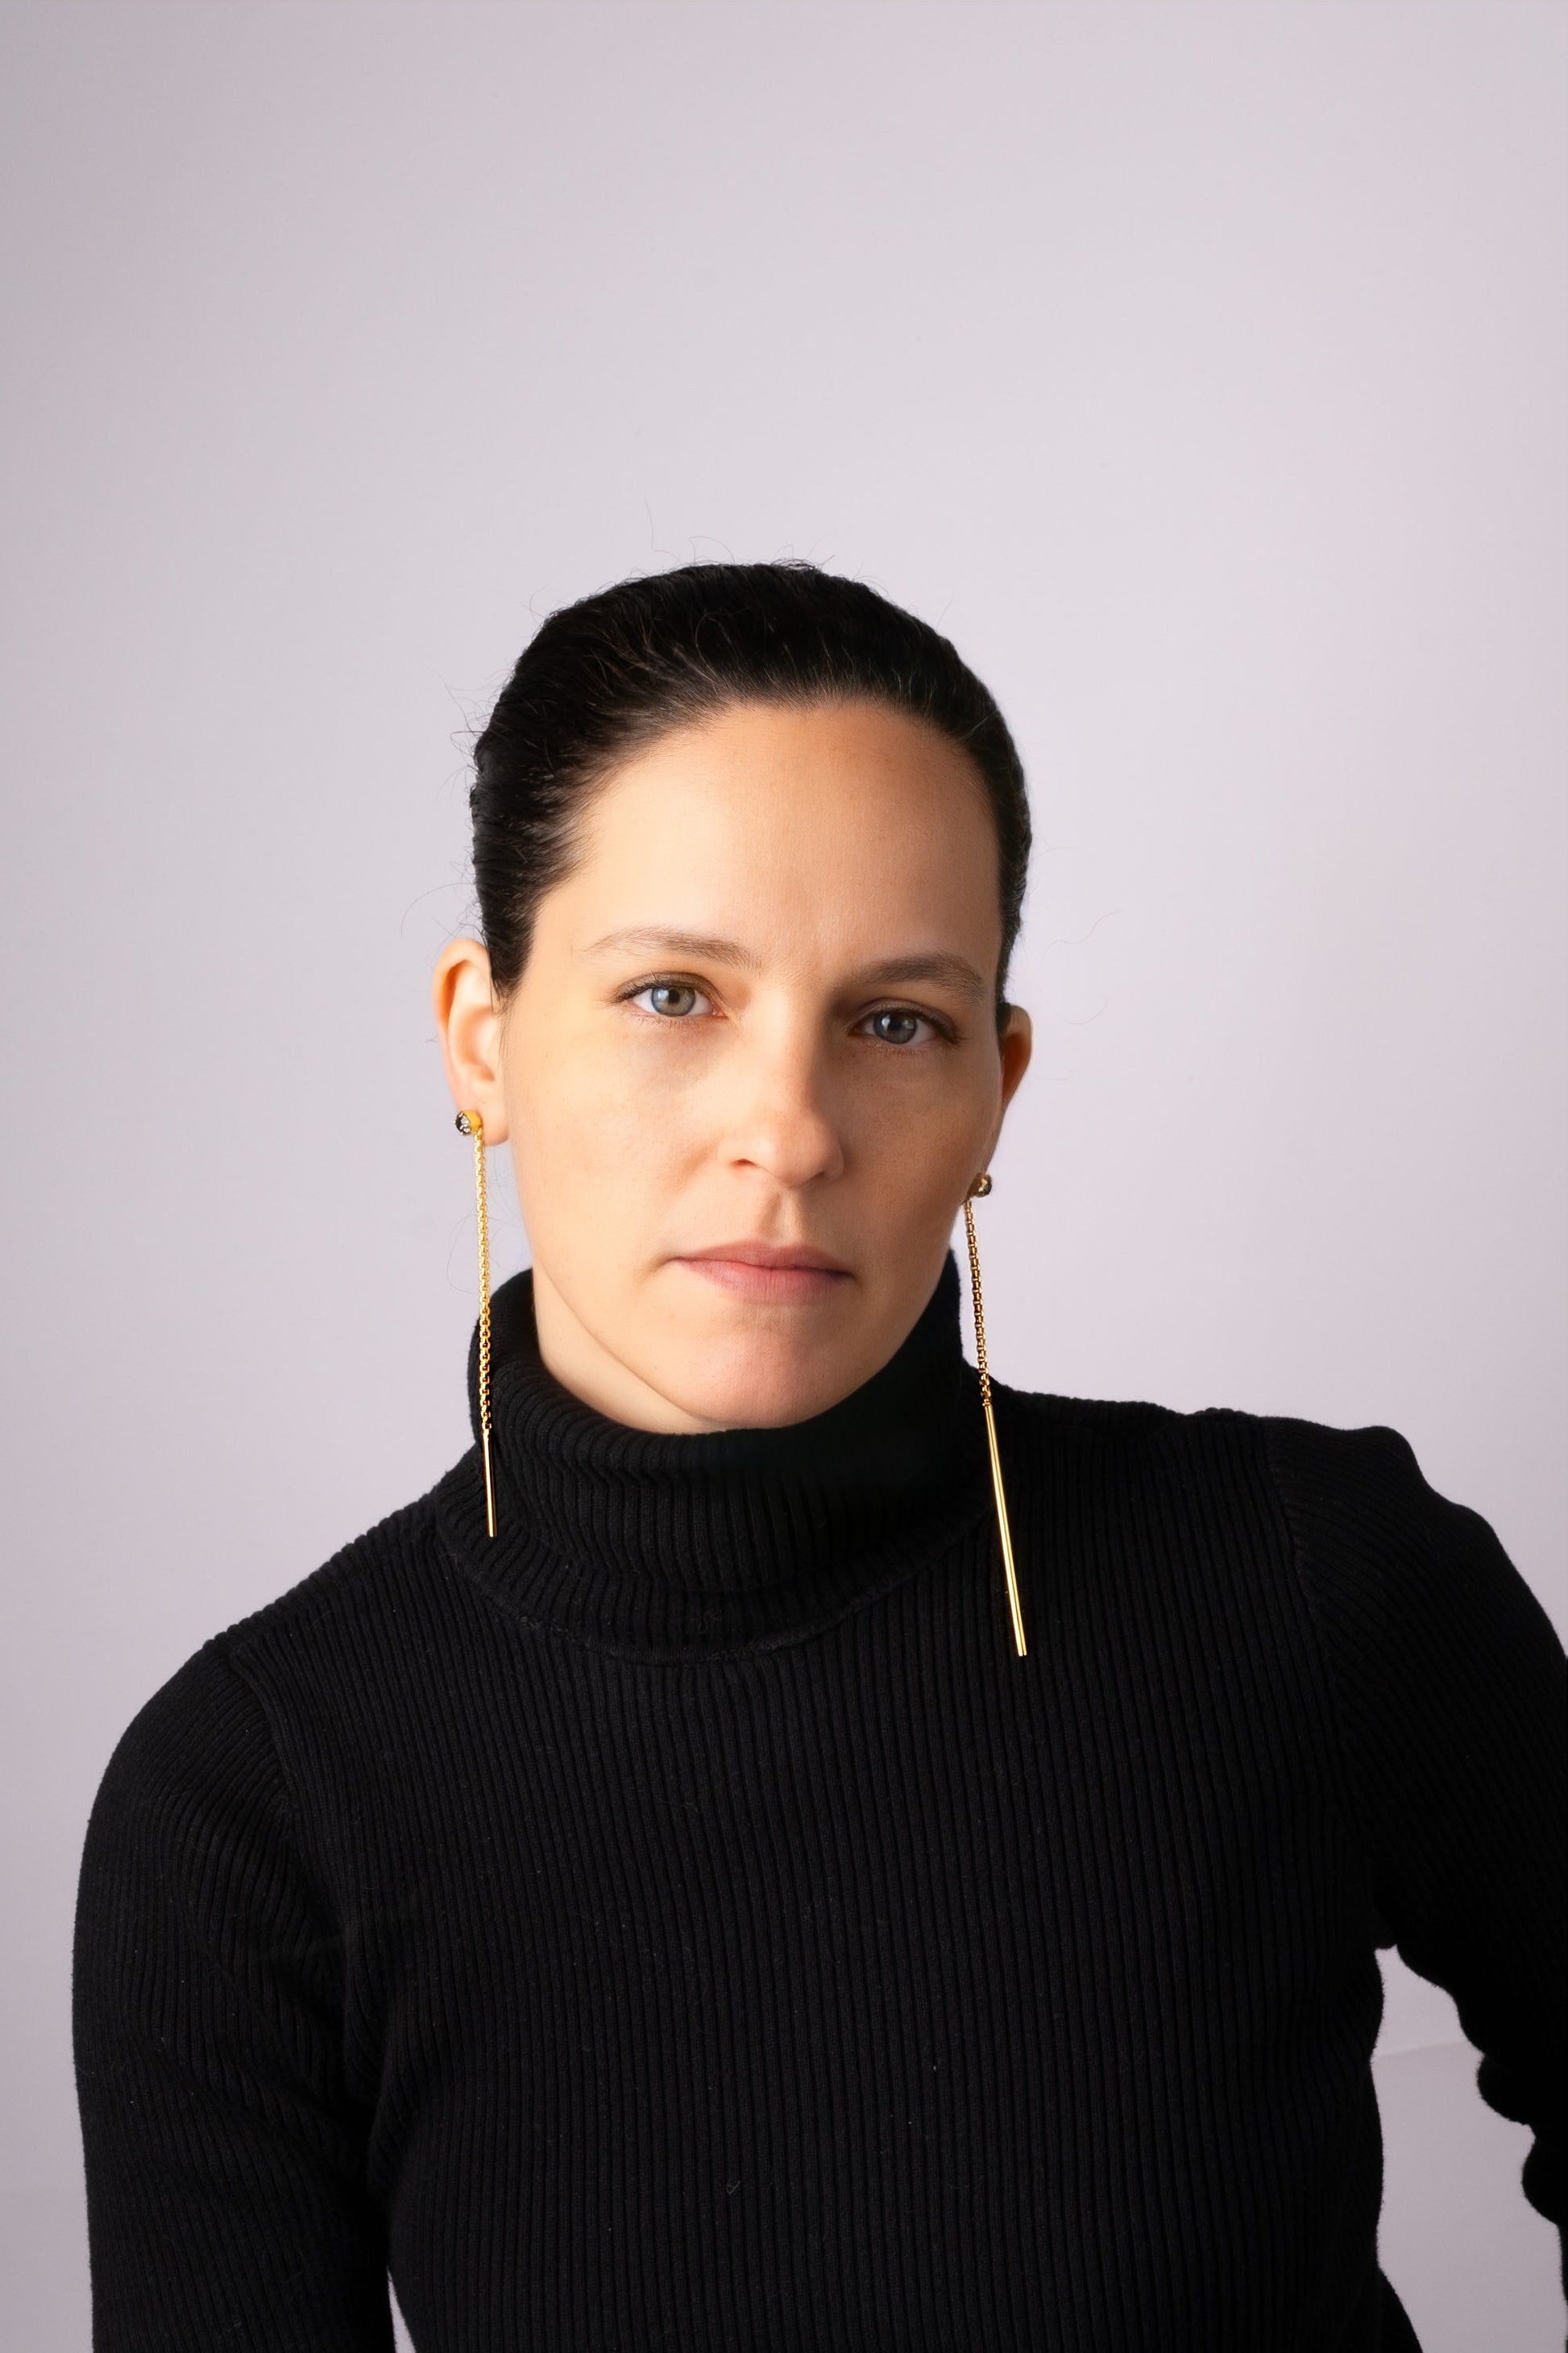 a woman wearing a black sweater and gold earrings